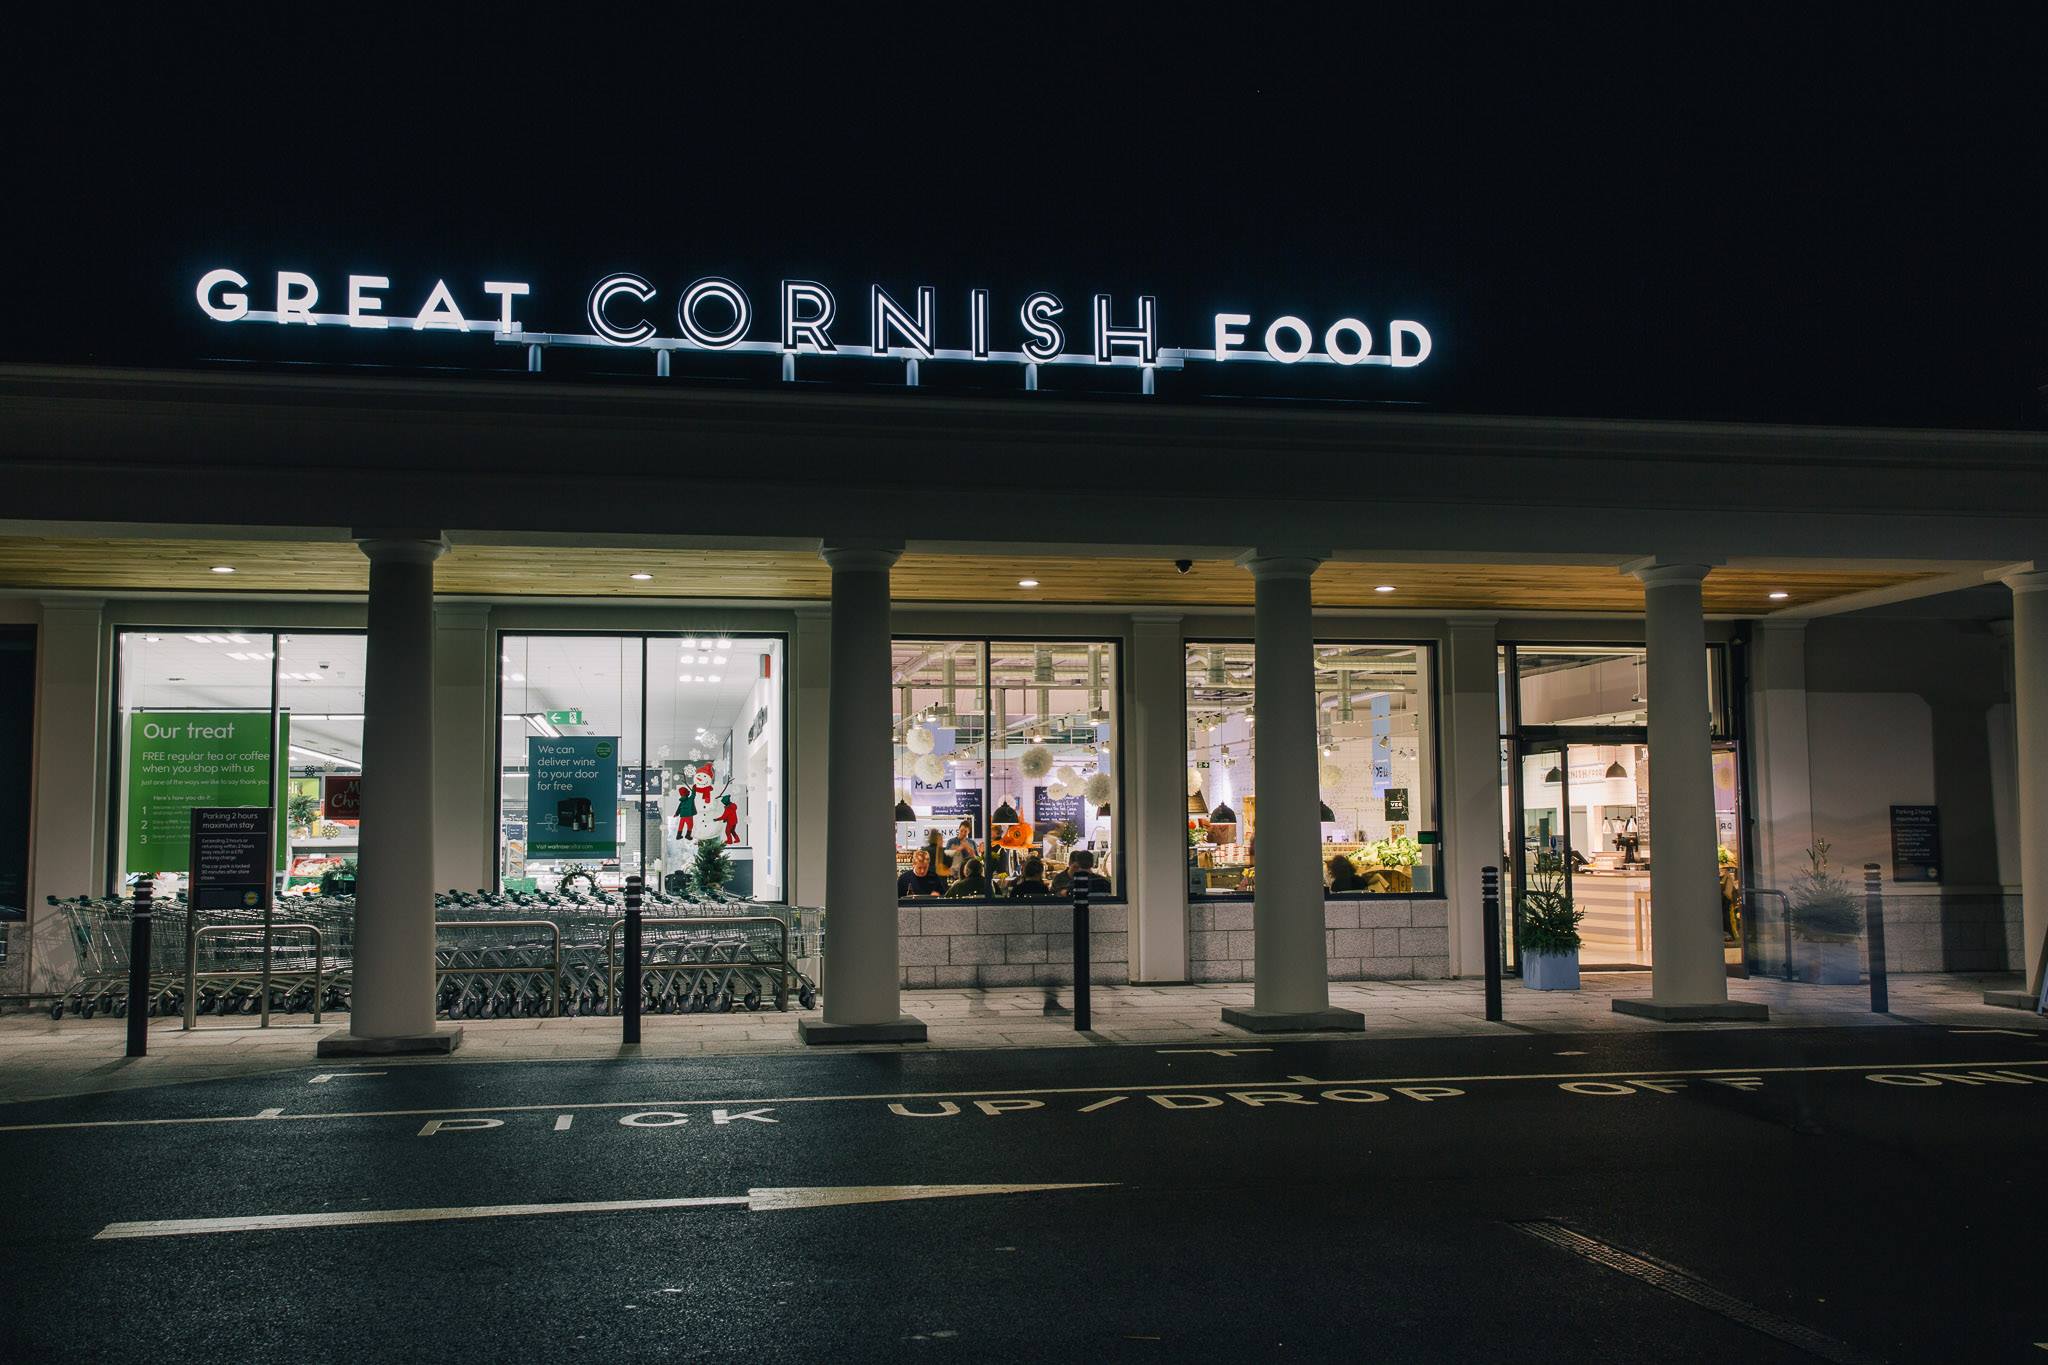 Outside of the Great Cornish Food Store